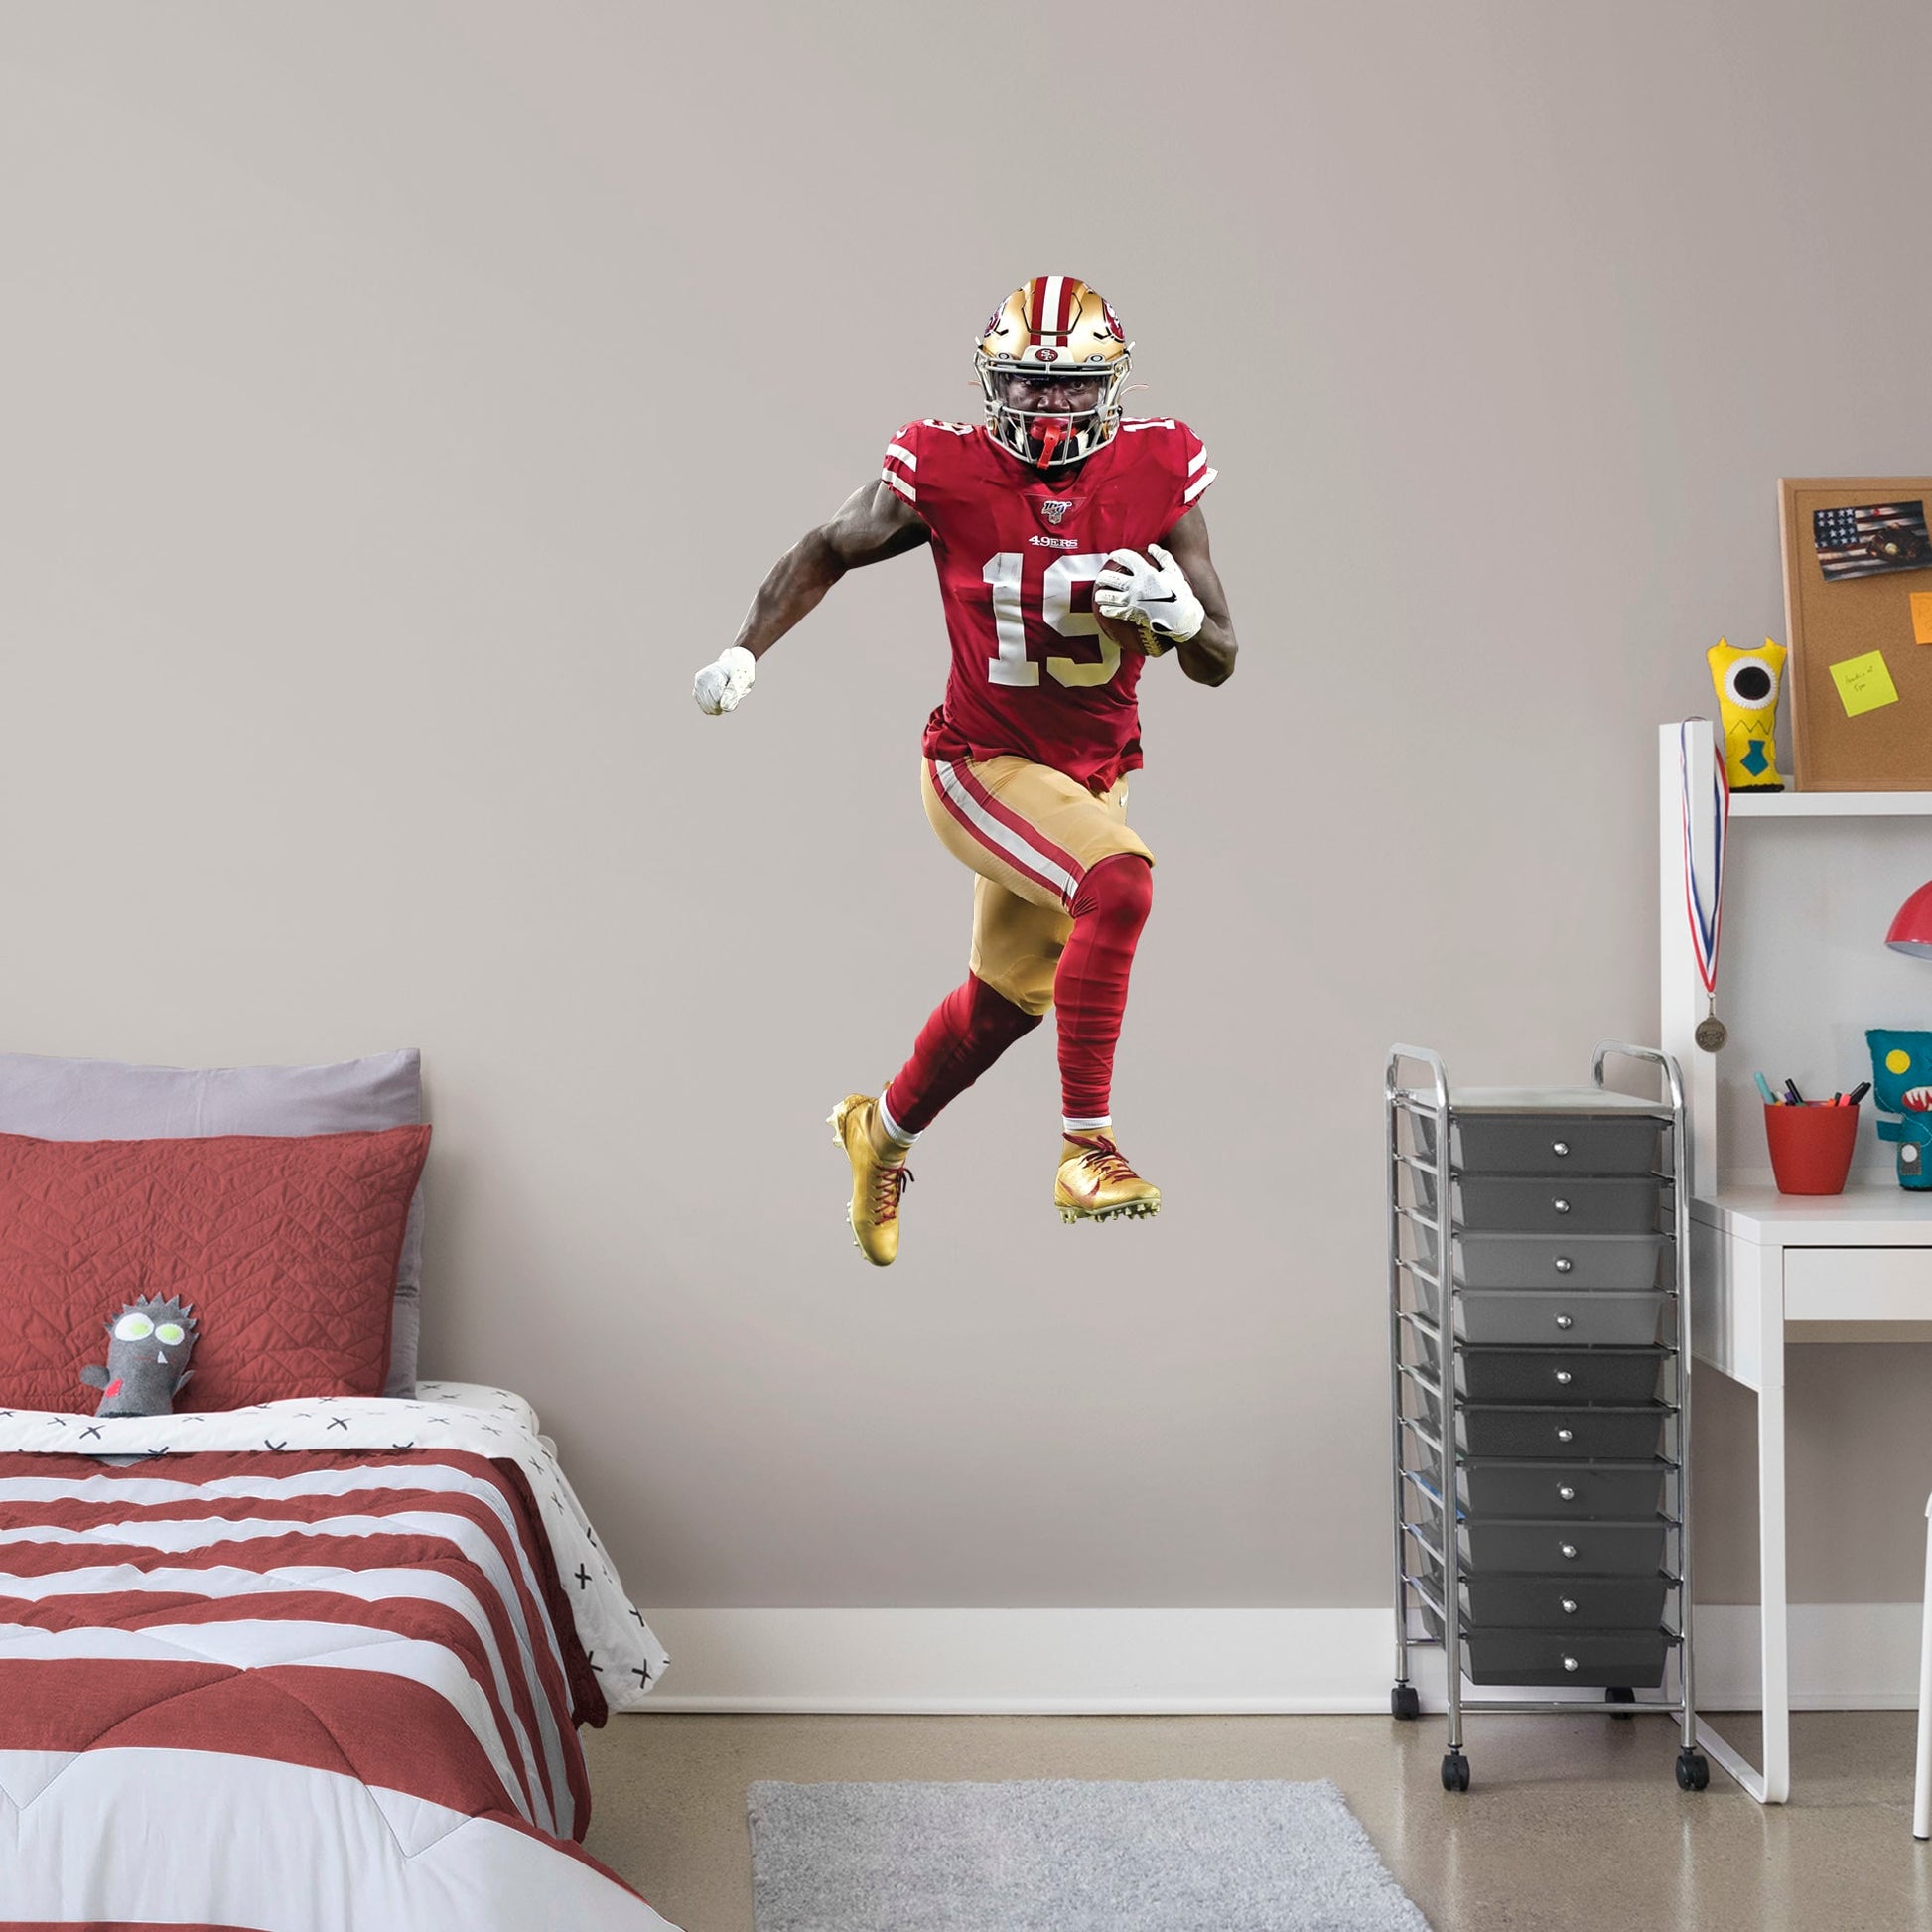 Giant Athlete + 2 Decals (28"W x 51"H) Deebo Samuel is one of the most exciting players in the NFL and you can show your support with this high-quality removable wall decal! Place this durable vinyl decal on any wall and wide receiver Deebo can dominate your room, office, or man cave like he helps the San Francisco 49ers dominate the league! This decal can be easily applied and removed on almost any surface, so this speedster can follow you everywhere you go! Let's go, Niners!